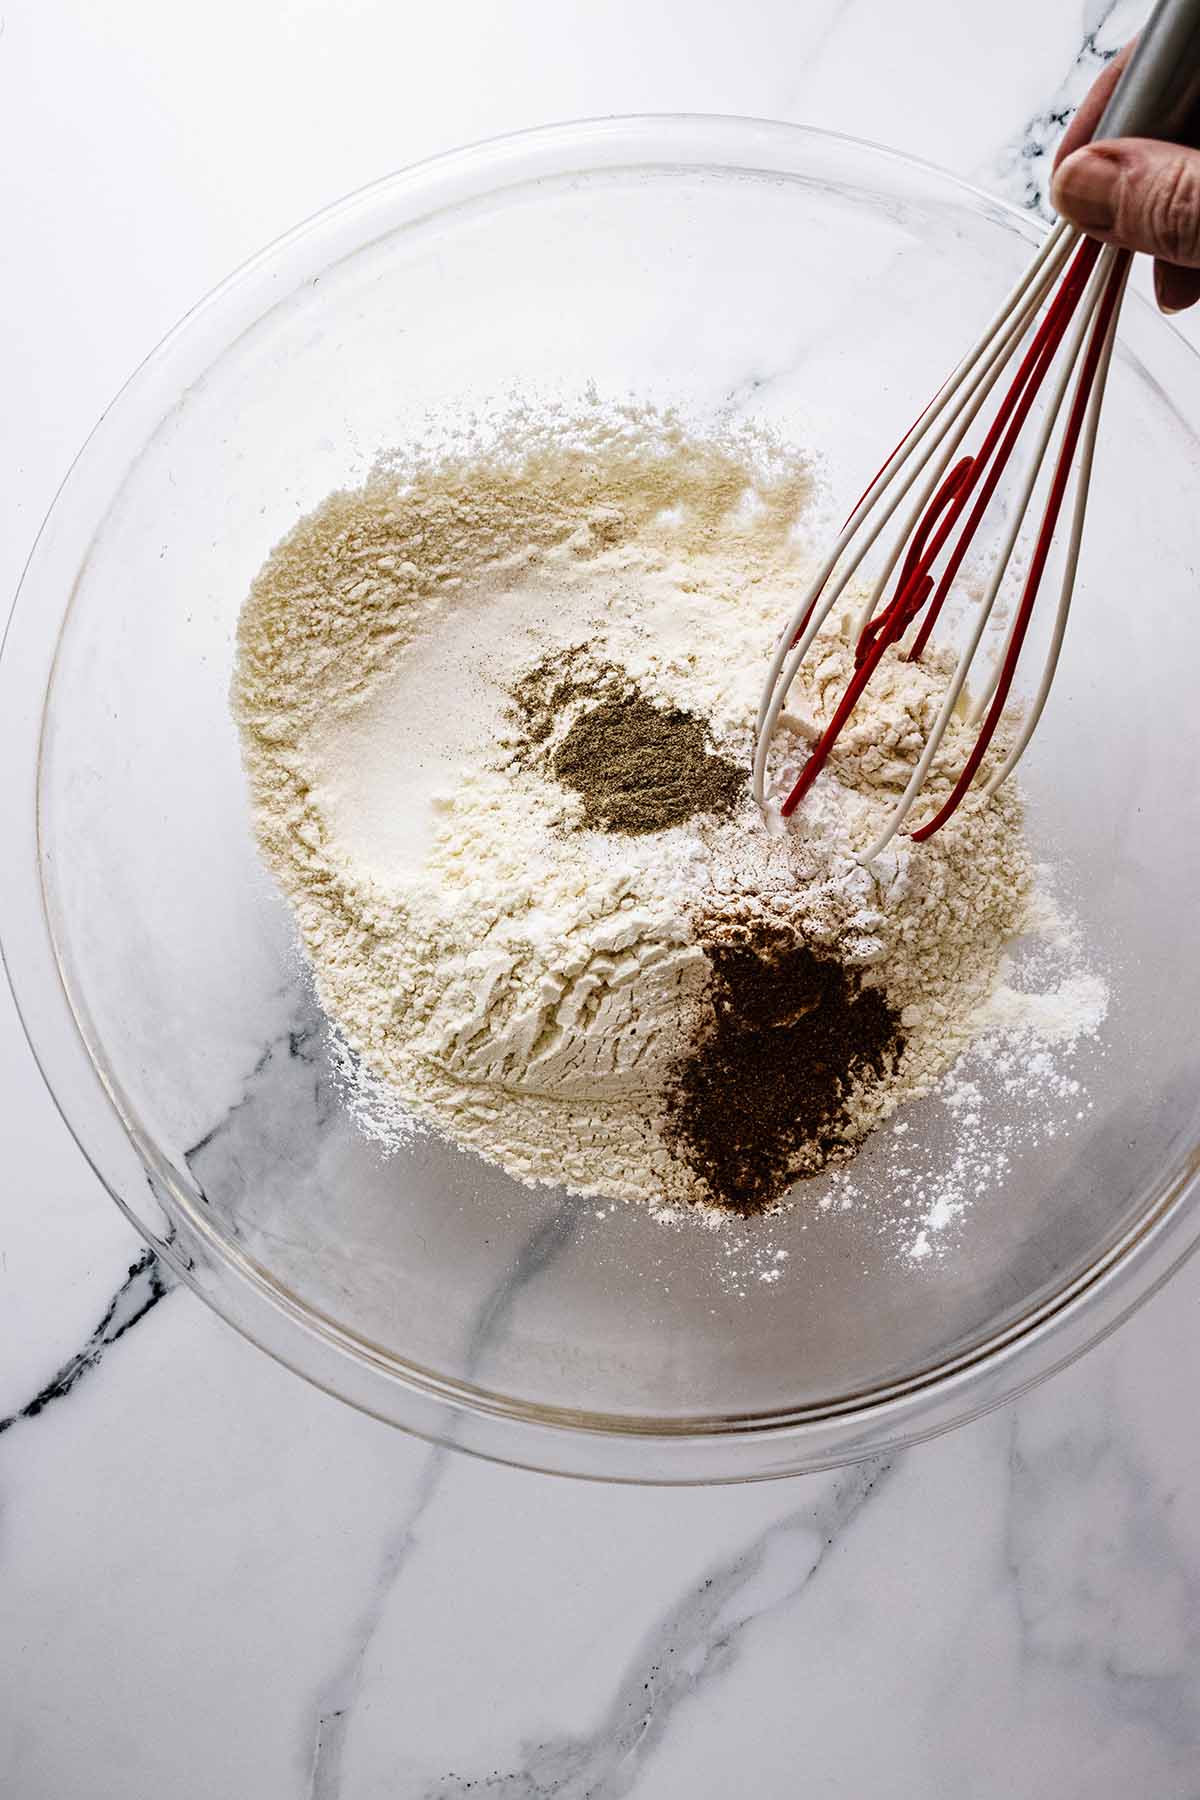 Dry ingredients in a large glass bowl on a marble countertop with a red and white whisk.